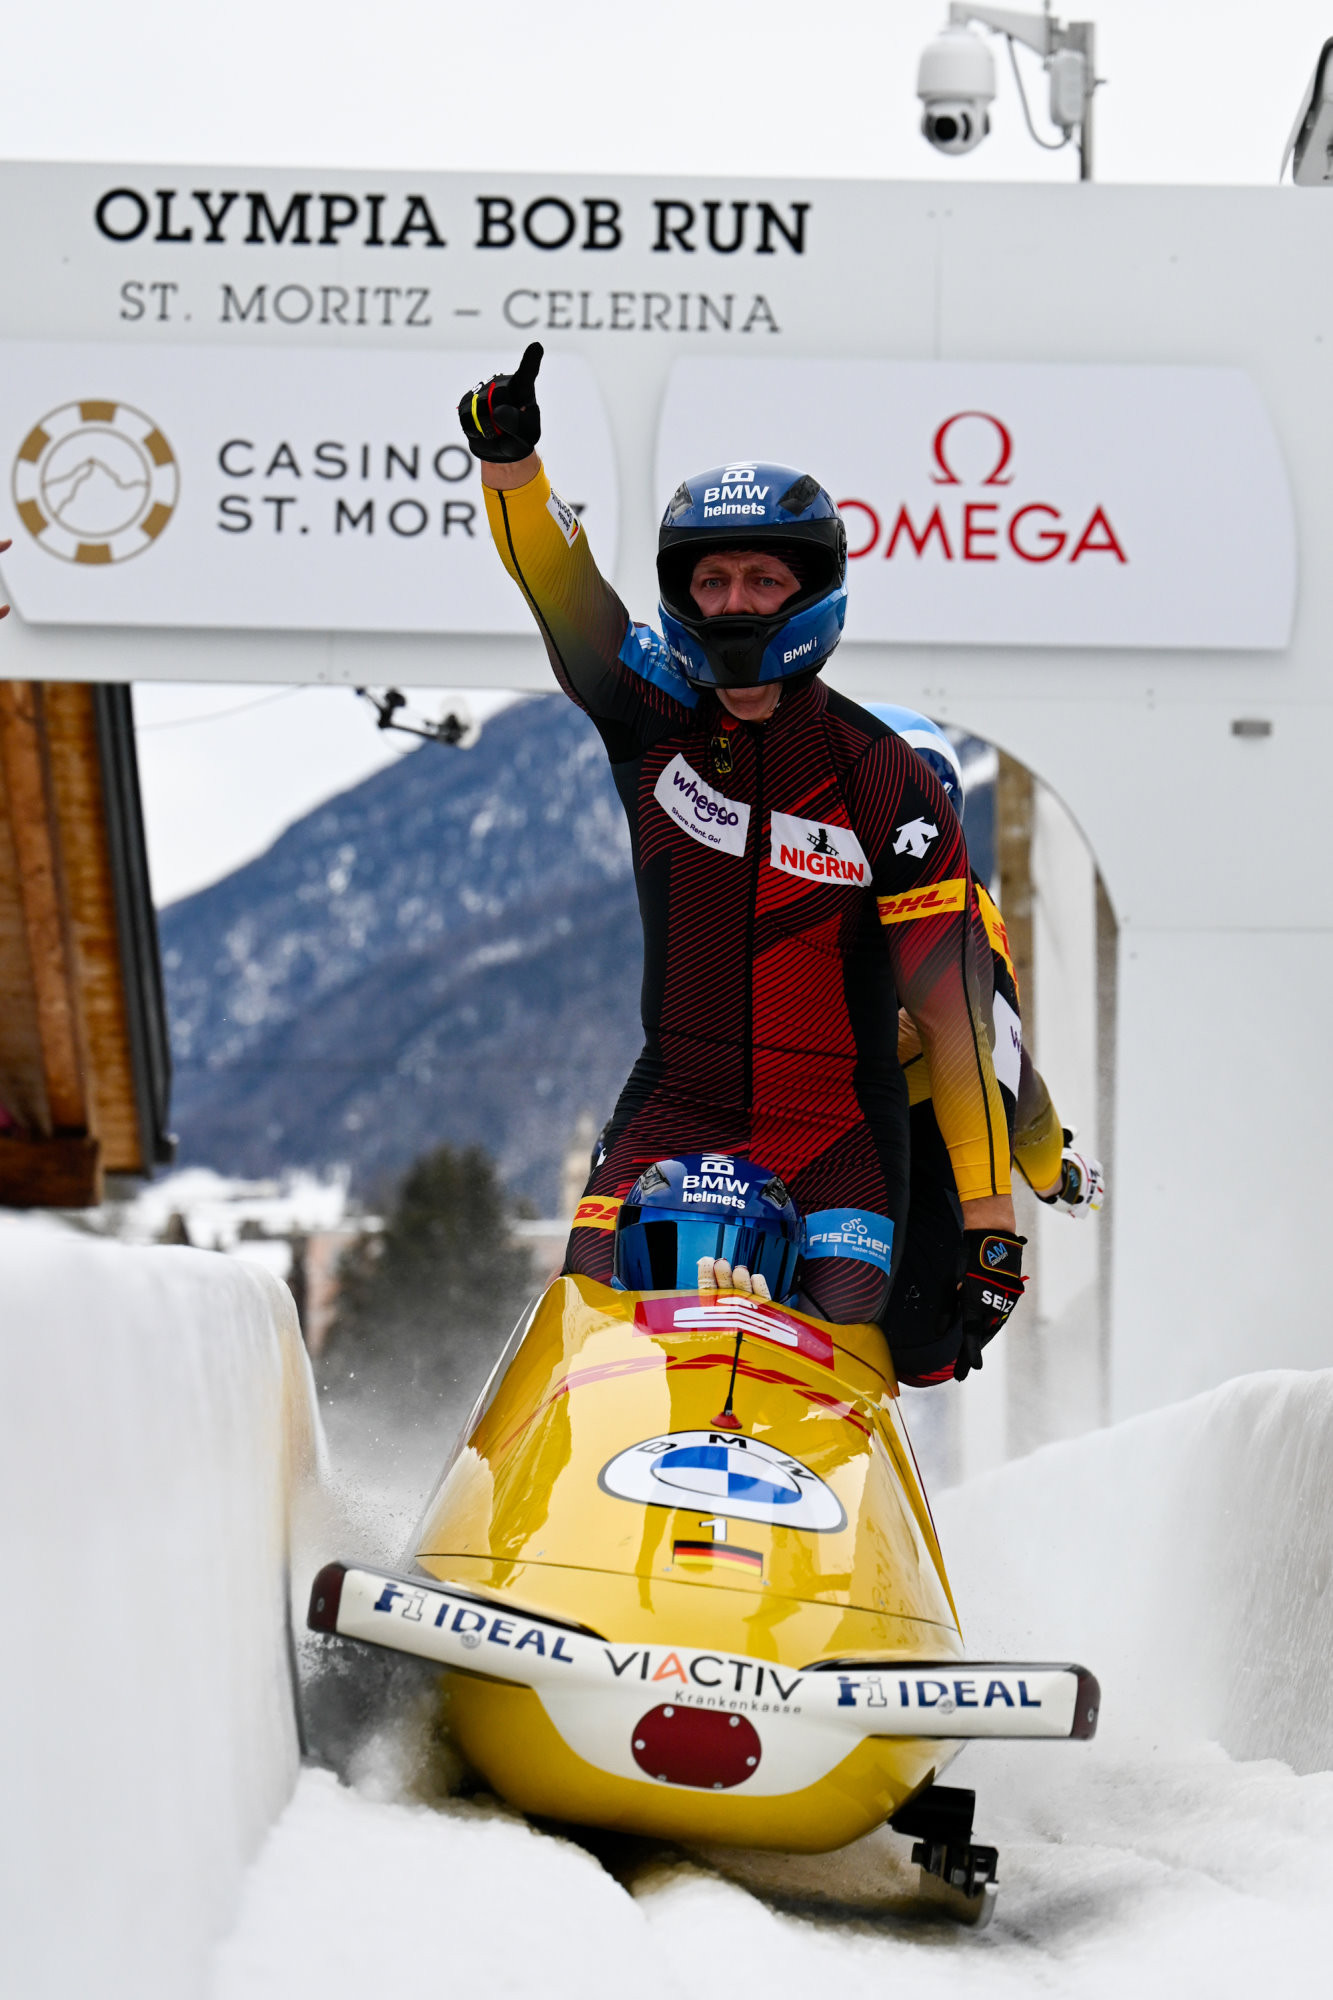 Francesco Friedrich is the most dominant bobsledder in history having also won the Olympic gold medal in the four-man bobsleigh at Pyeongchang 2018 and Beijing 2022 ©IBSF